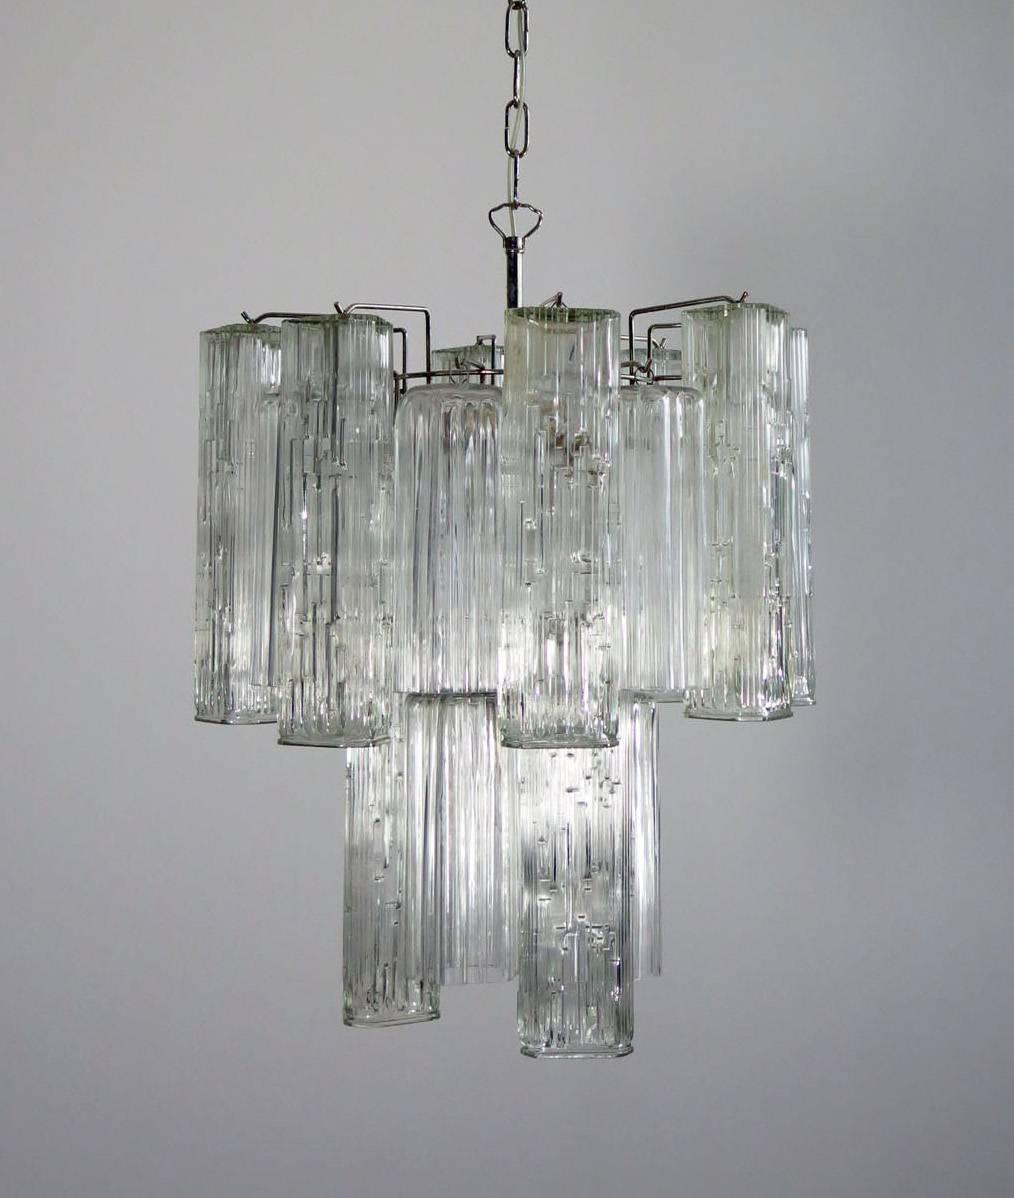 Italian vintage Murano chandelier made of 22 individual tubular glass pendants hanging on a chrome frame.

Measures: H 110 with chain, 60 without chain x 46 cm diameter.